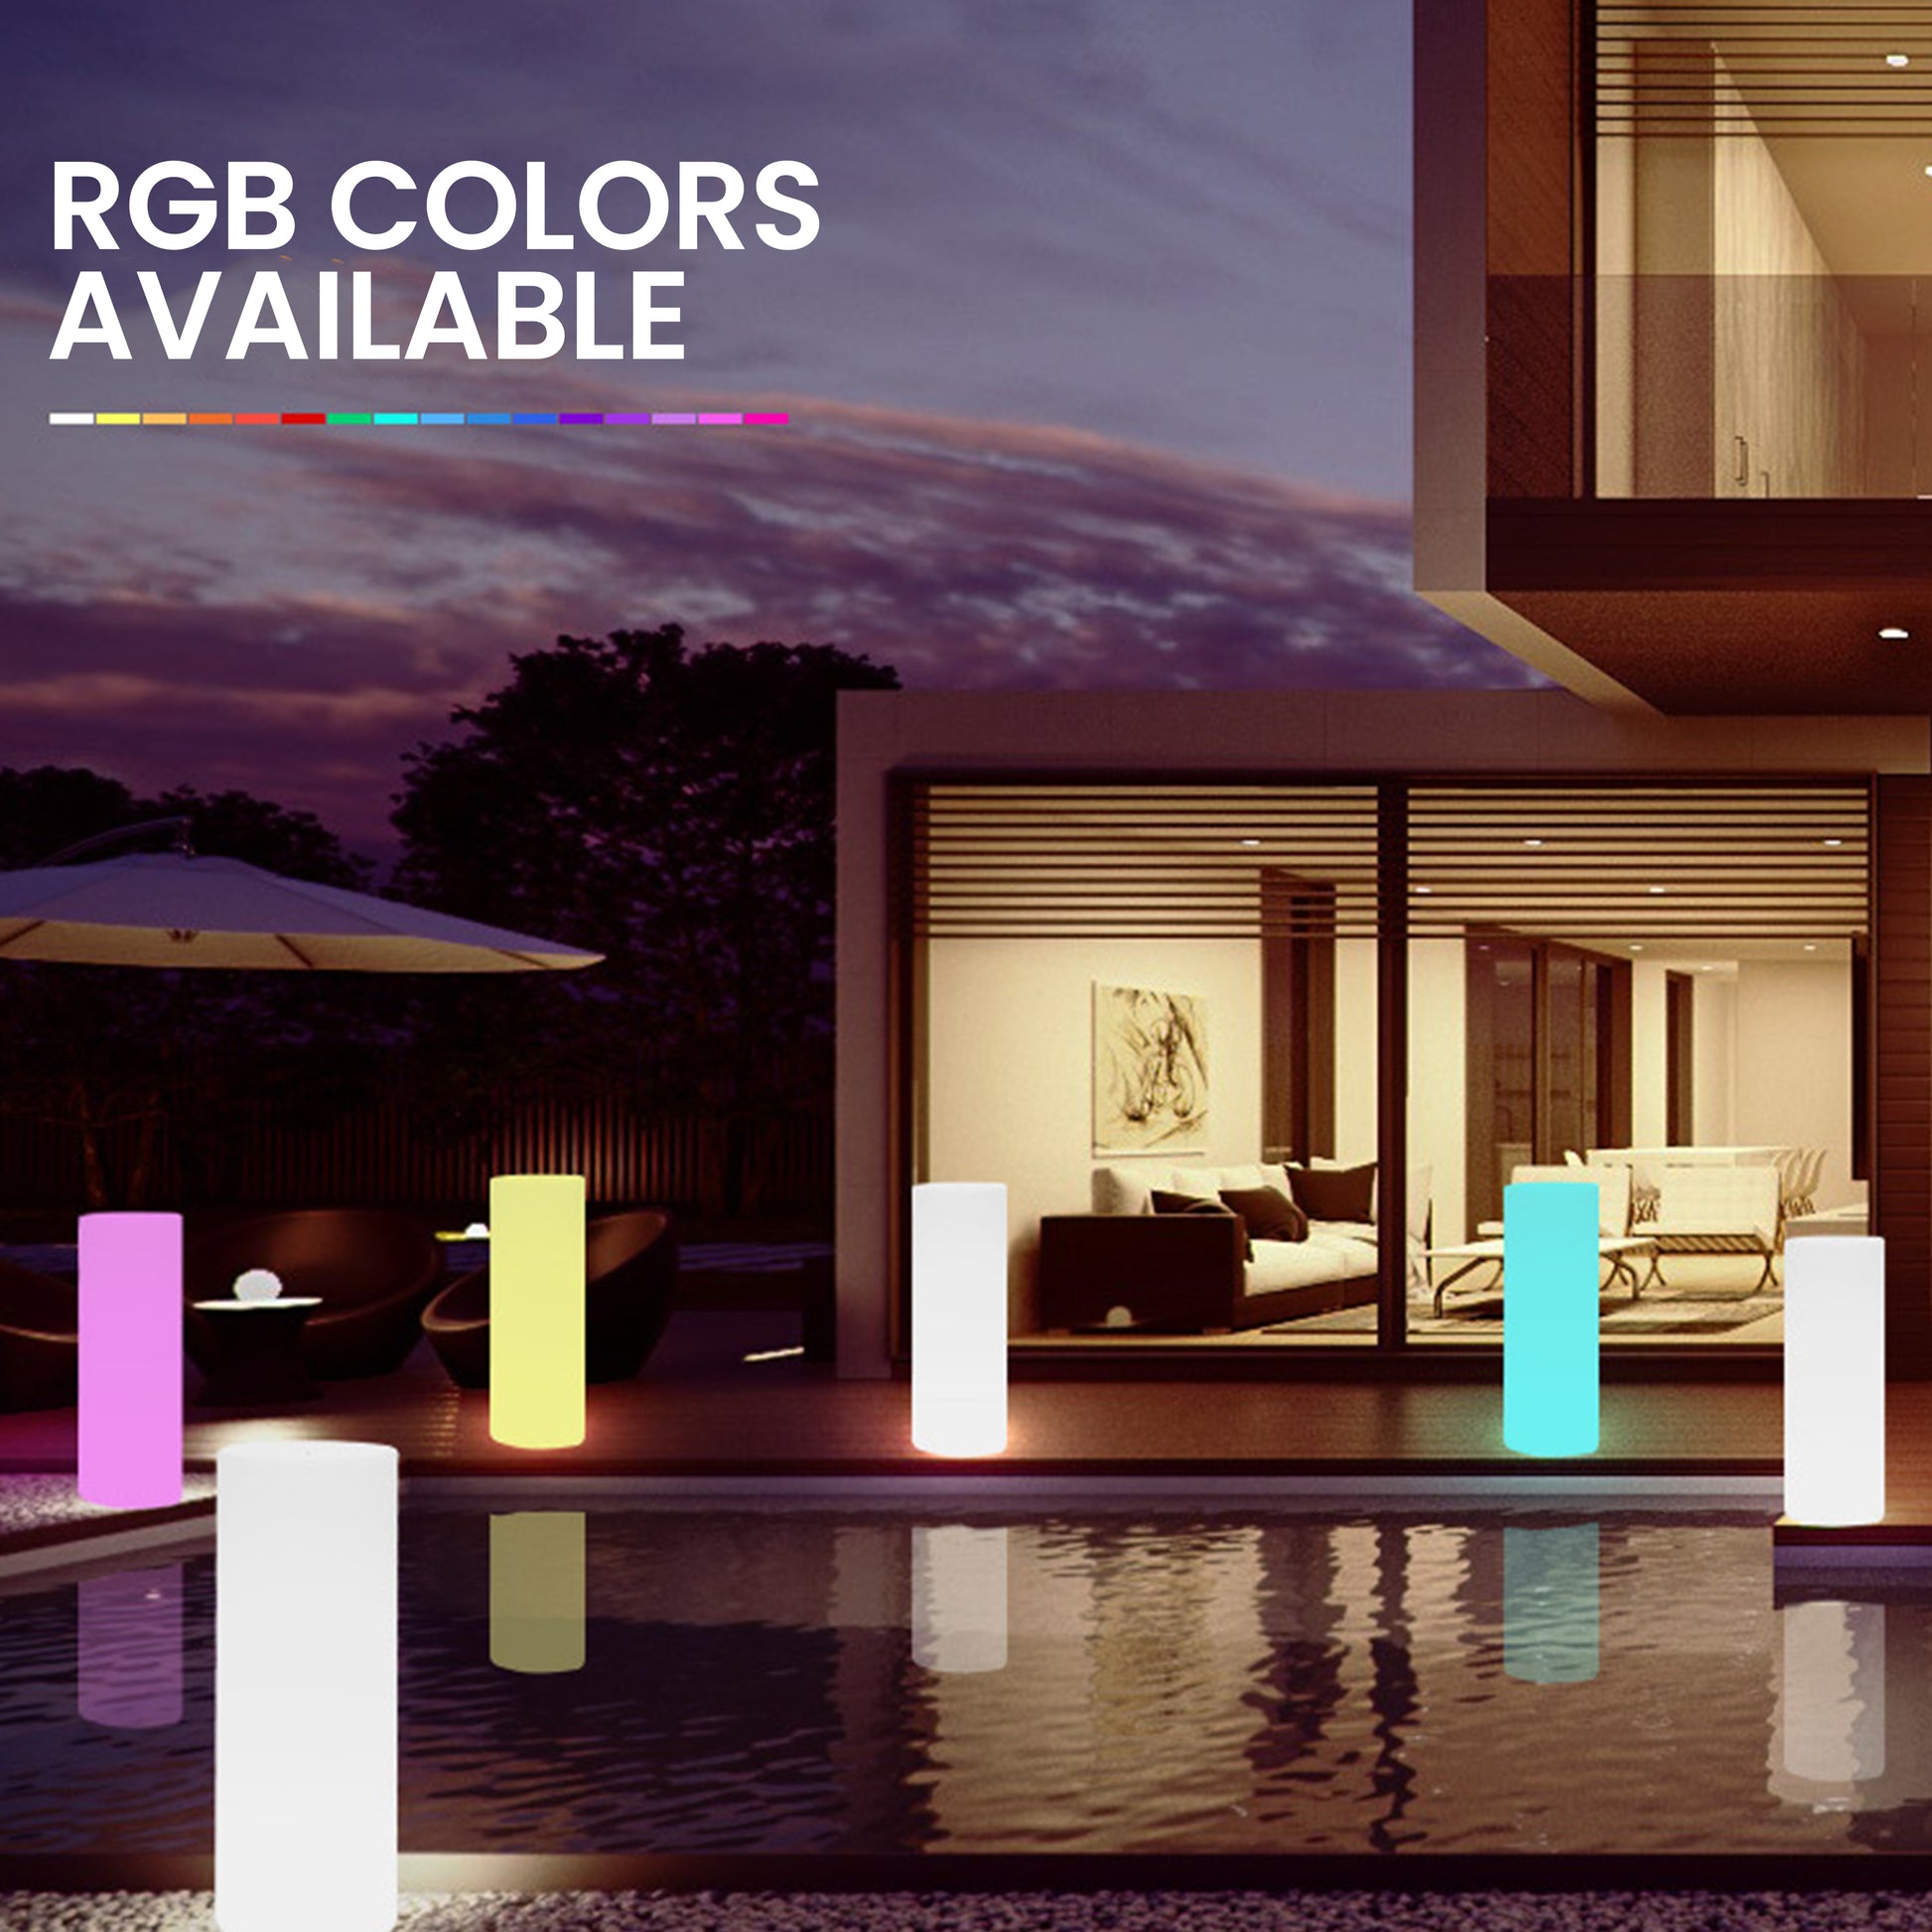 Waterproof Outdoor RGB Floor Lamp Dimmable with Remote Control, USB Chargeable LED Garden Lights Colour Changing Mood Light Round Shape - Buy Waterproof Outdoor RGB Floor Lamp Dimmable with Remote Control, USB Chargeable LED Garden Lights Colour Changing 